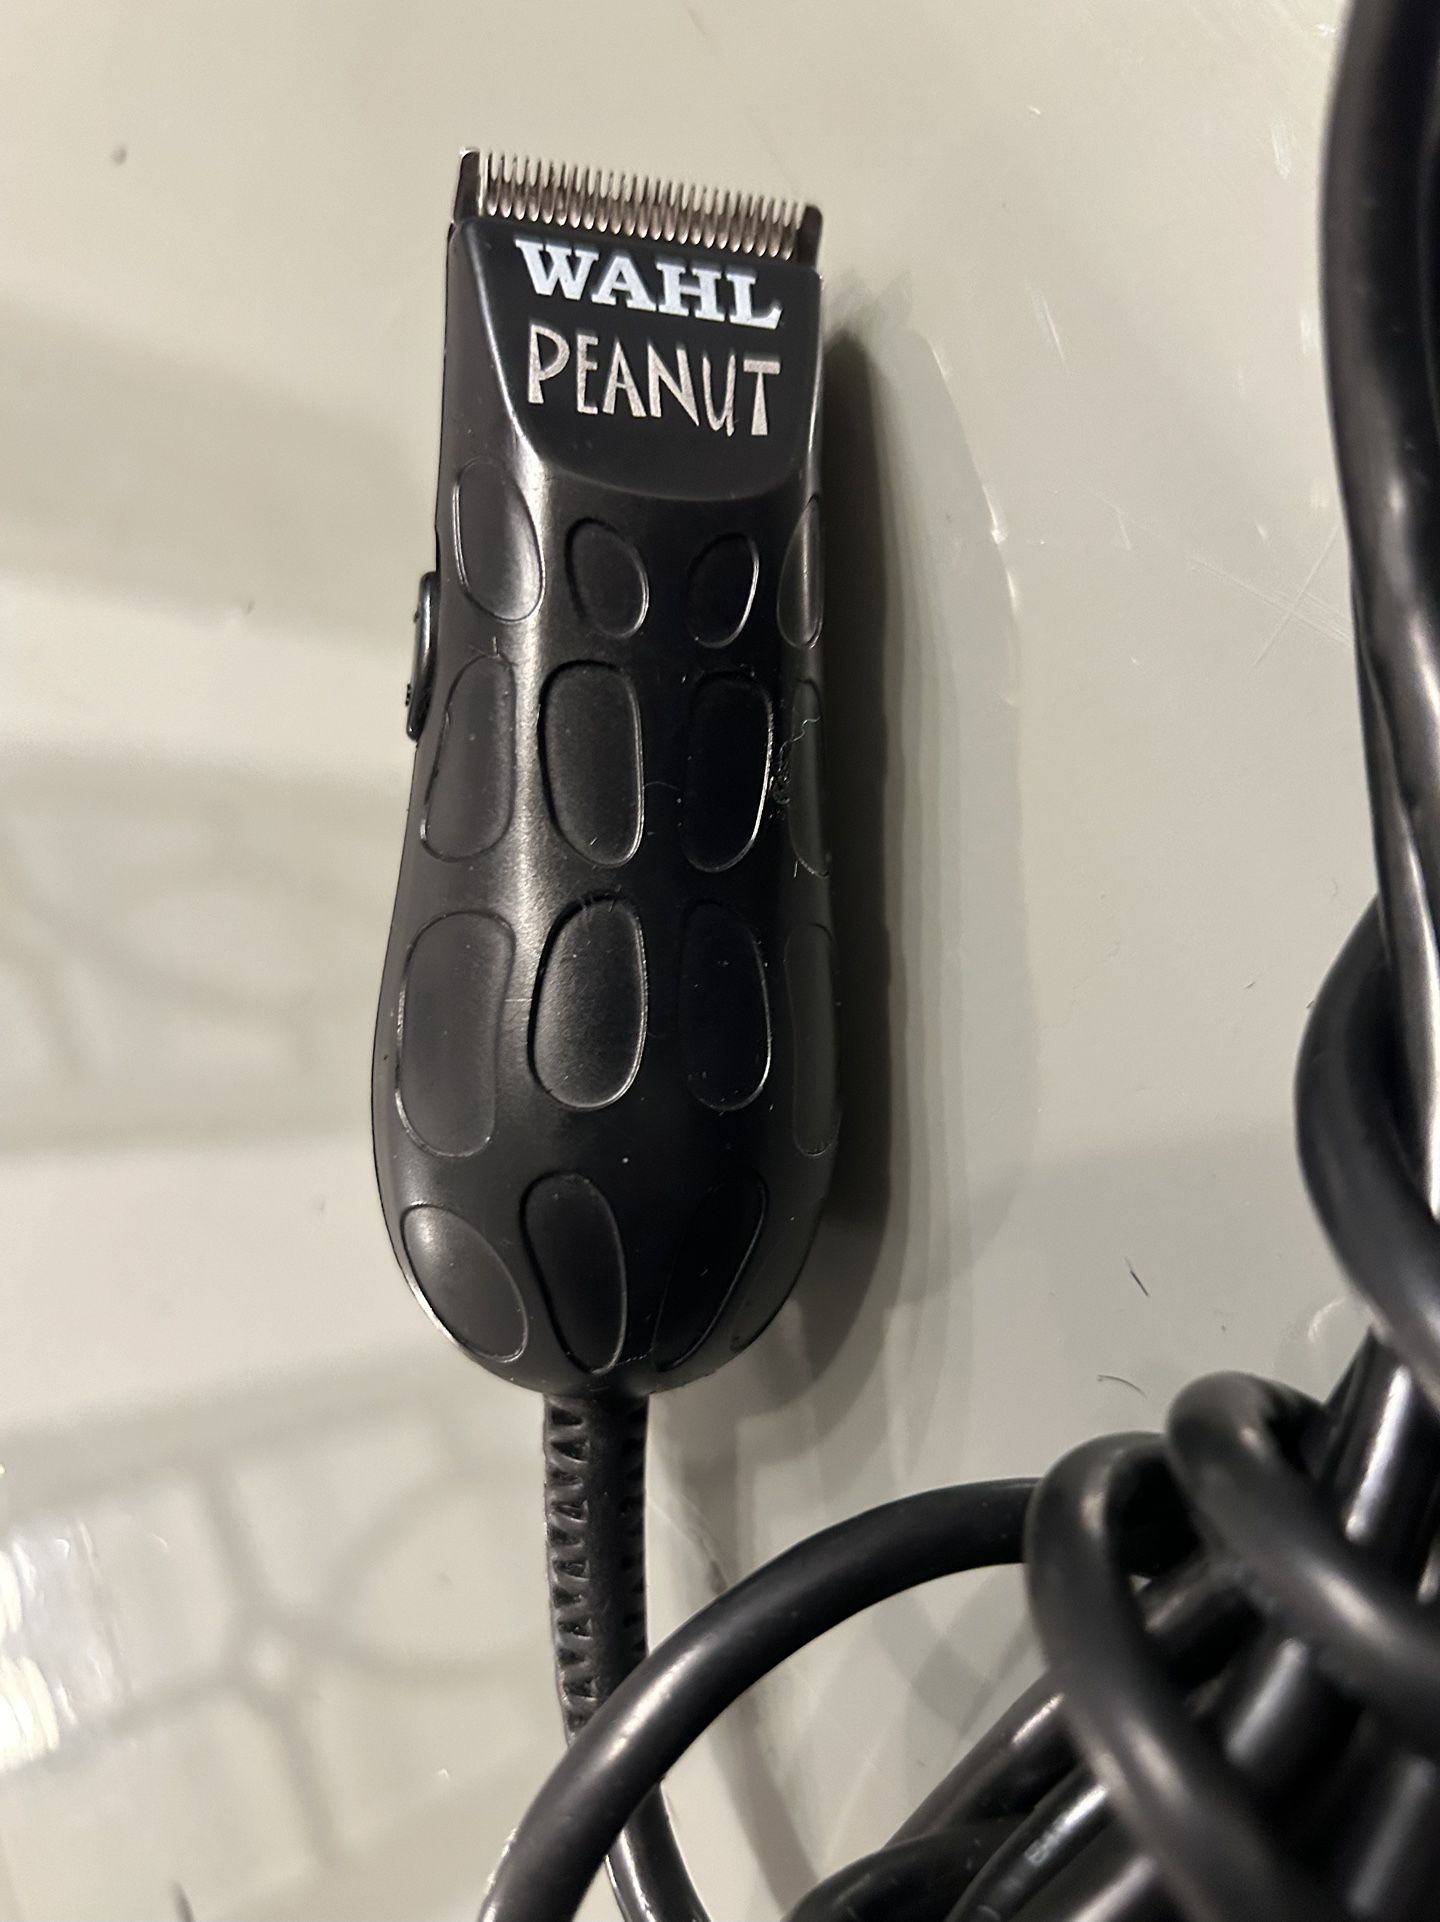 Wahl Peanut Clippers 